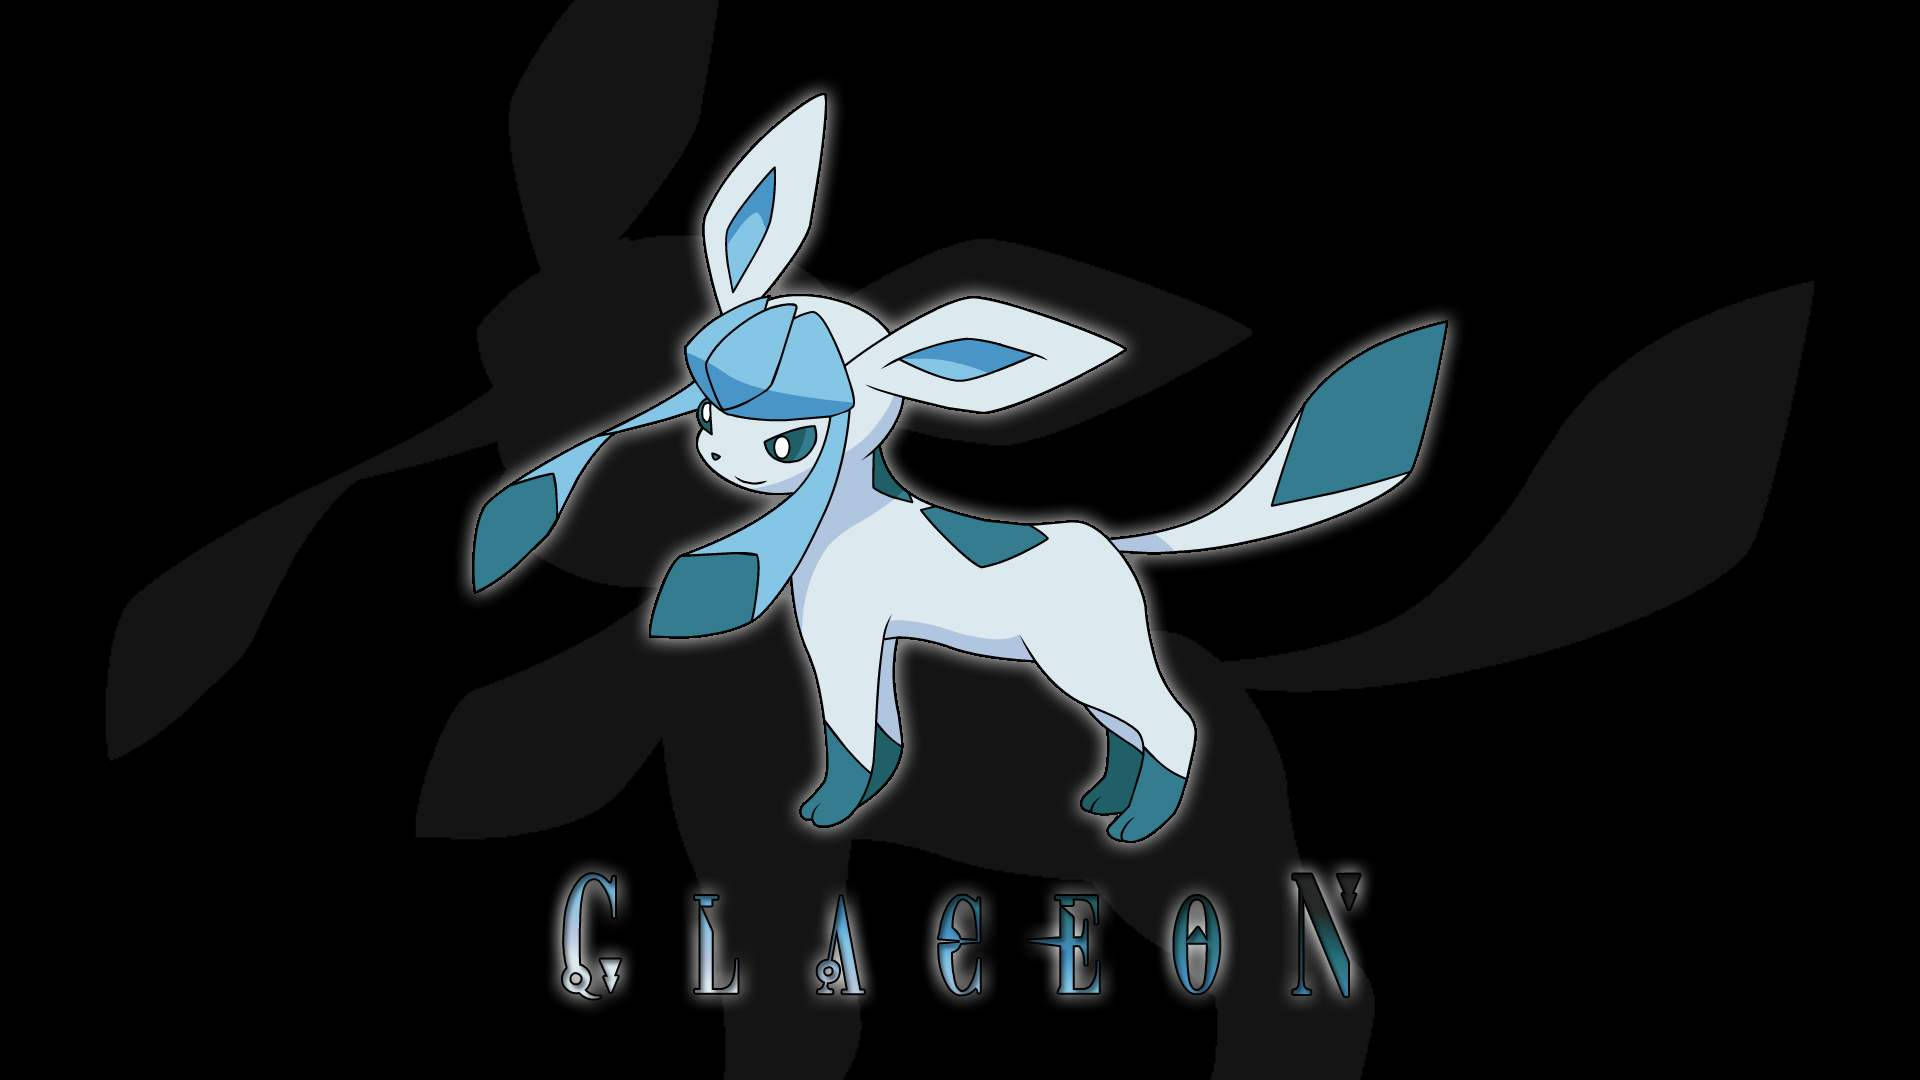 Glaceon In Black Artwork